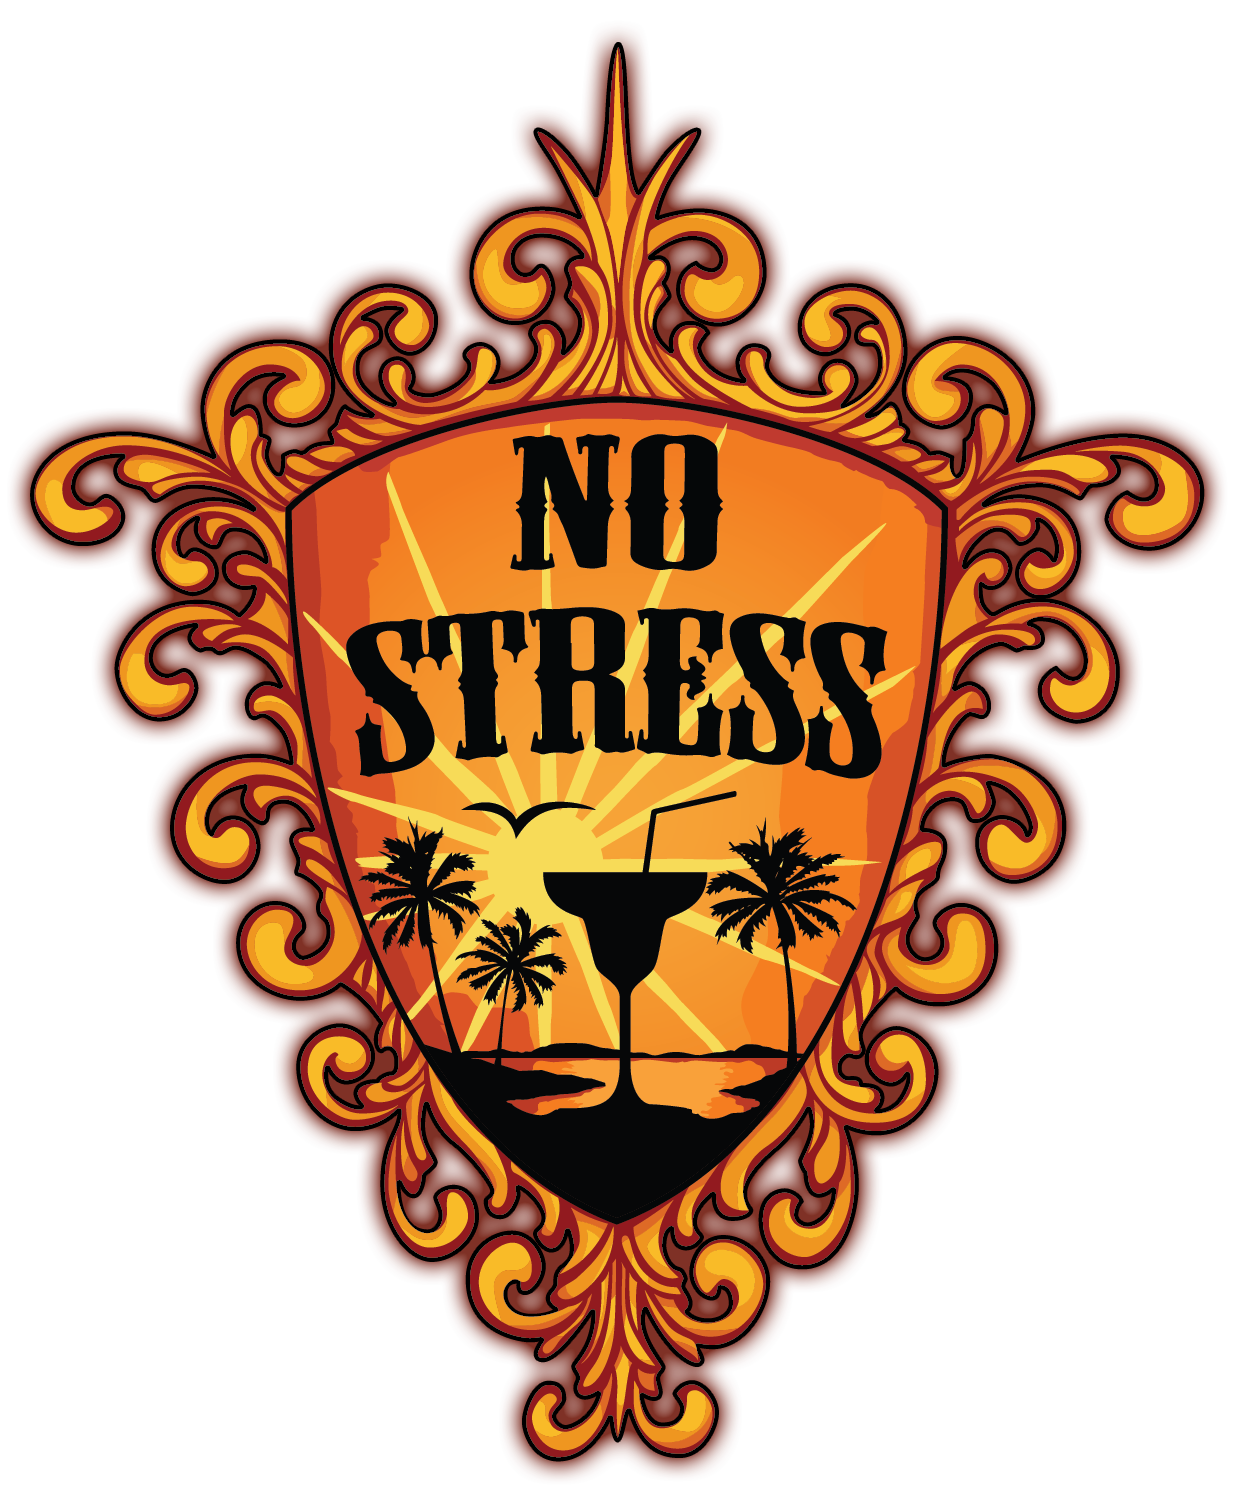 No Stress - your local cocktail pub